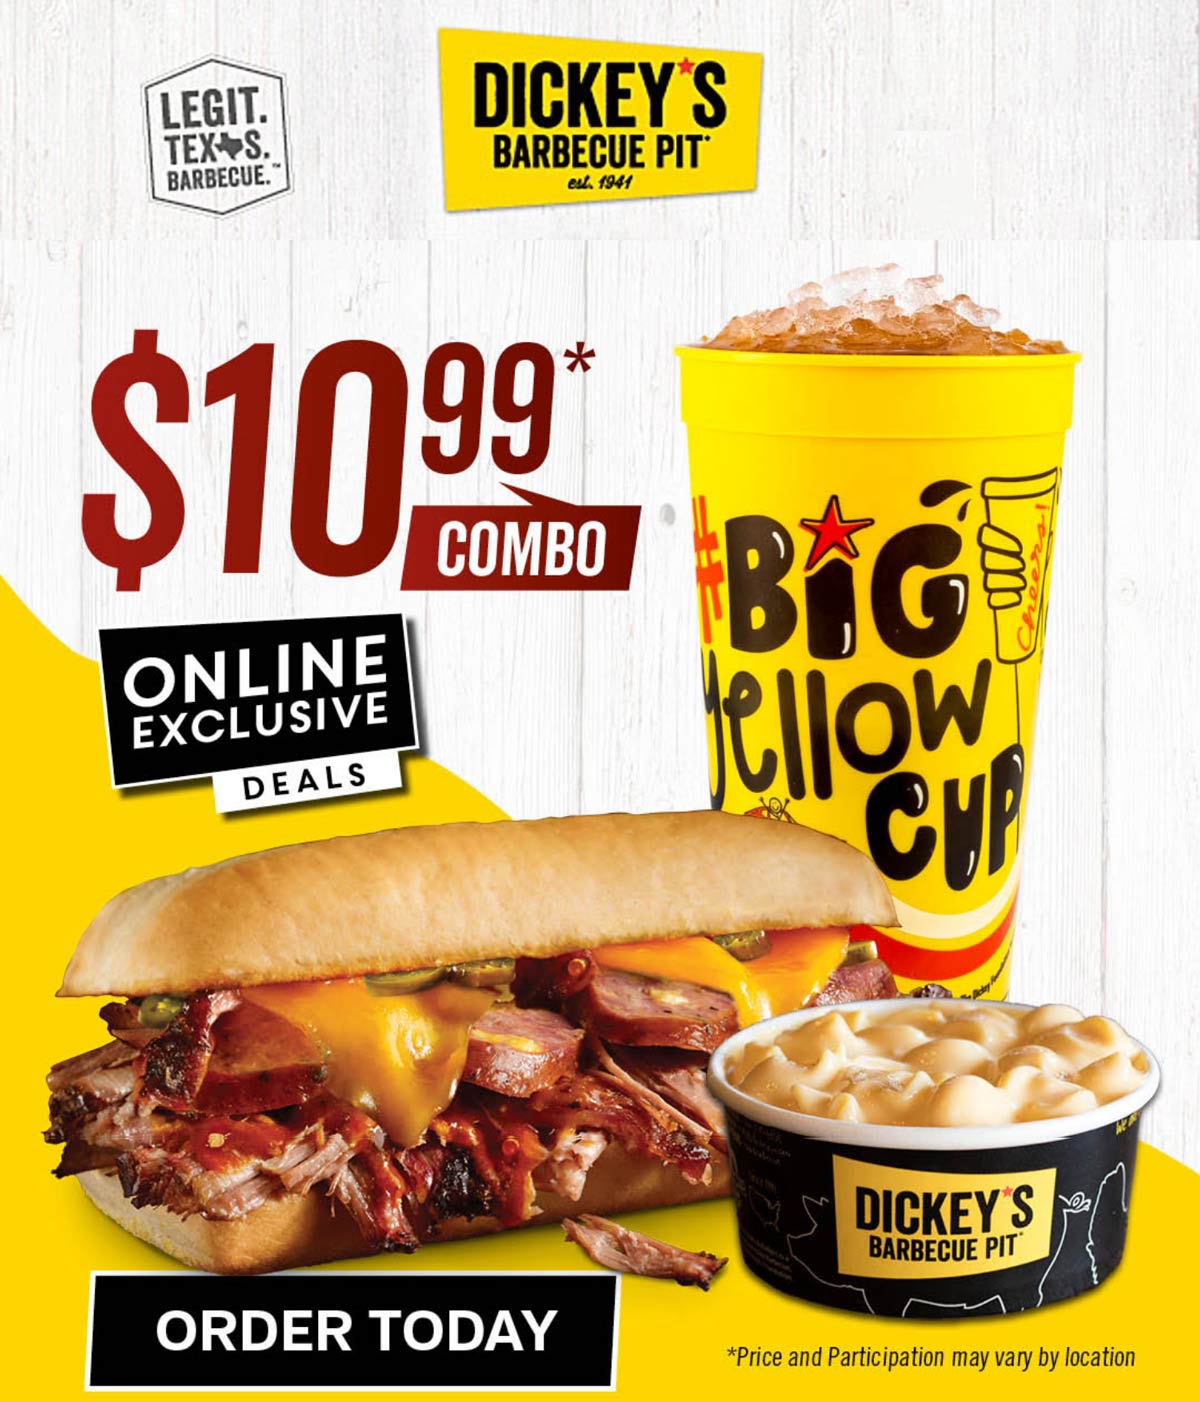 Dickeys Barbecue Pit restaurants Coupon  Westerner sandwich + side + drink = $11 at Dickeys Barbecue Pit #dickeysbarbecuepit 